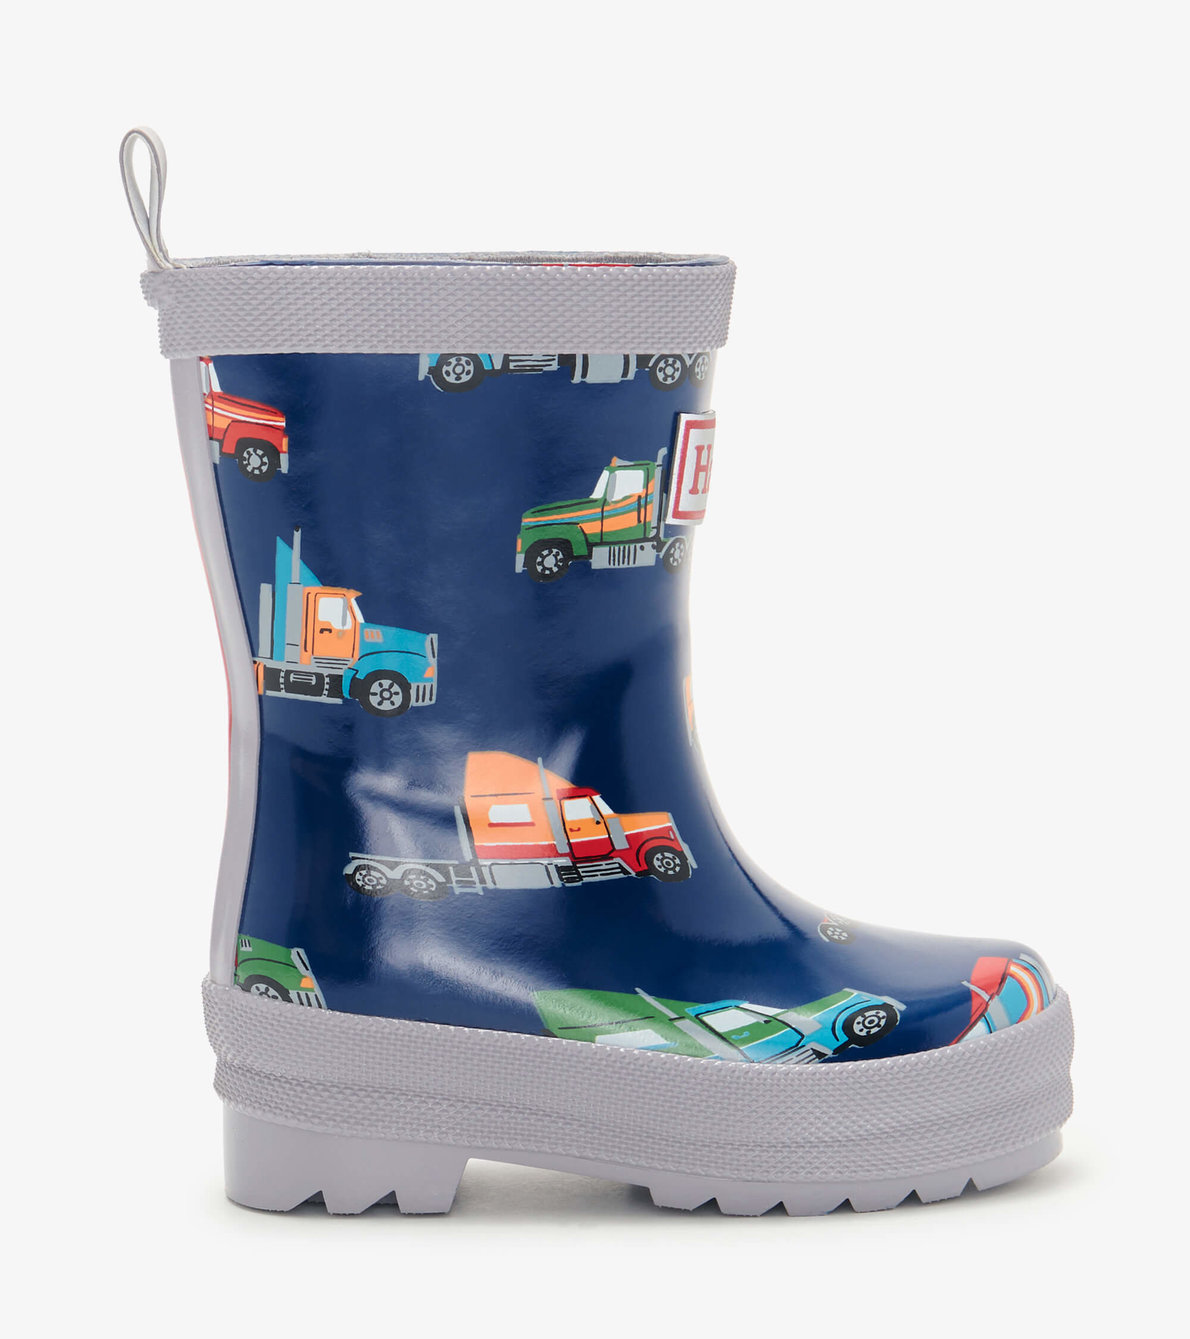 View larger image of My 1st Wellies - Big Rigs